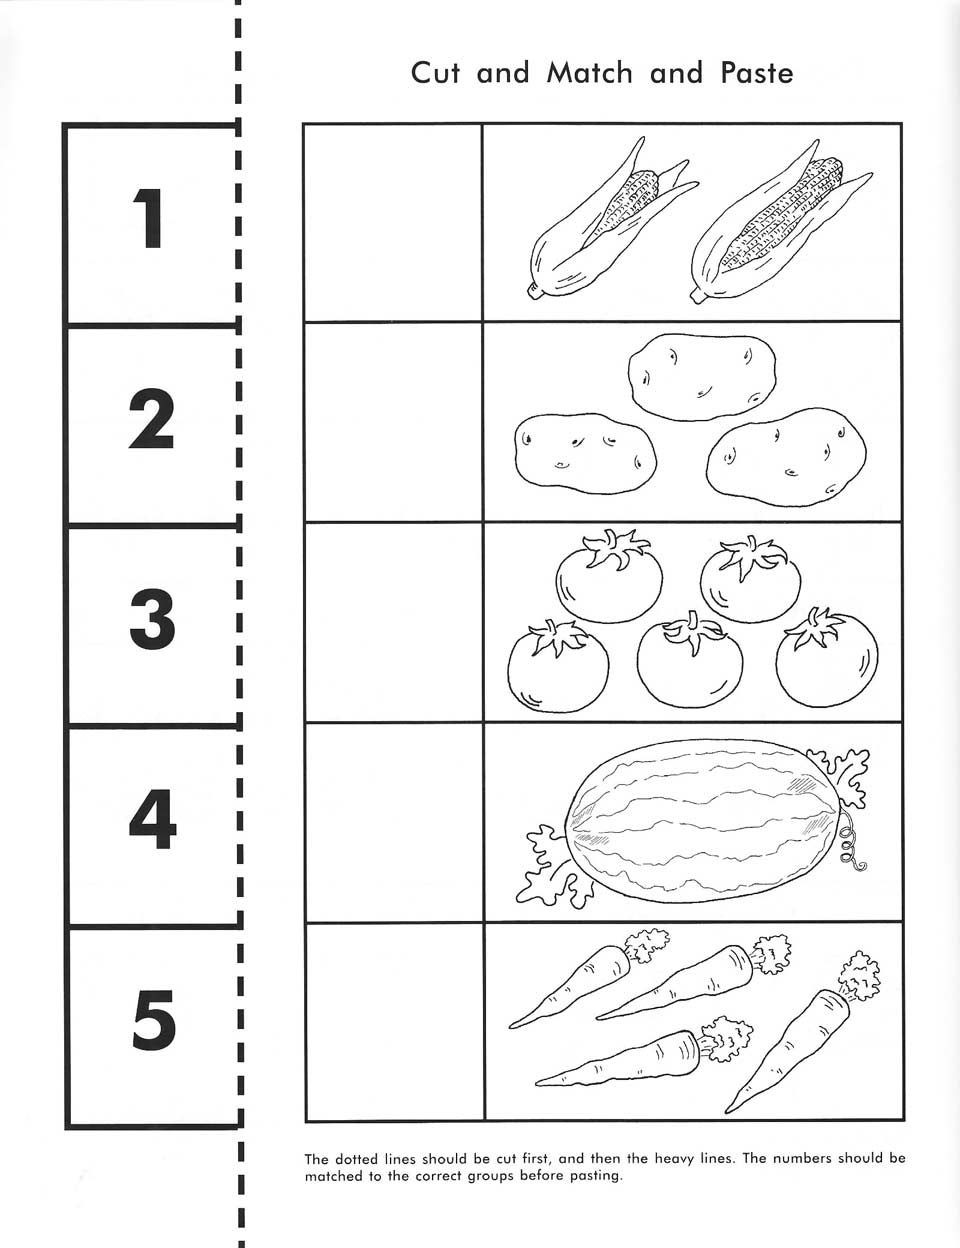 Kindergarten Worksheets Cut and Paste Cut Count Match and Paste Free Printable